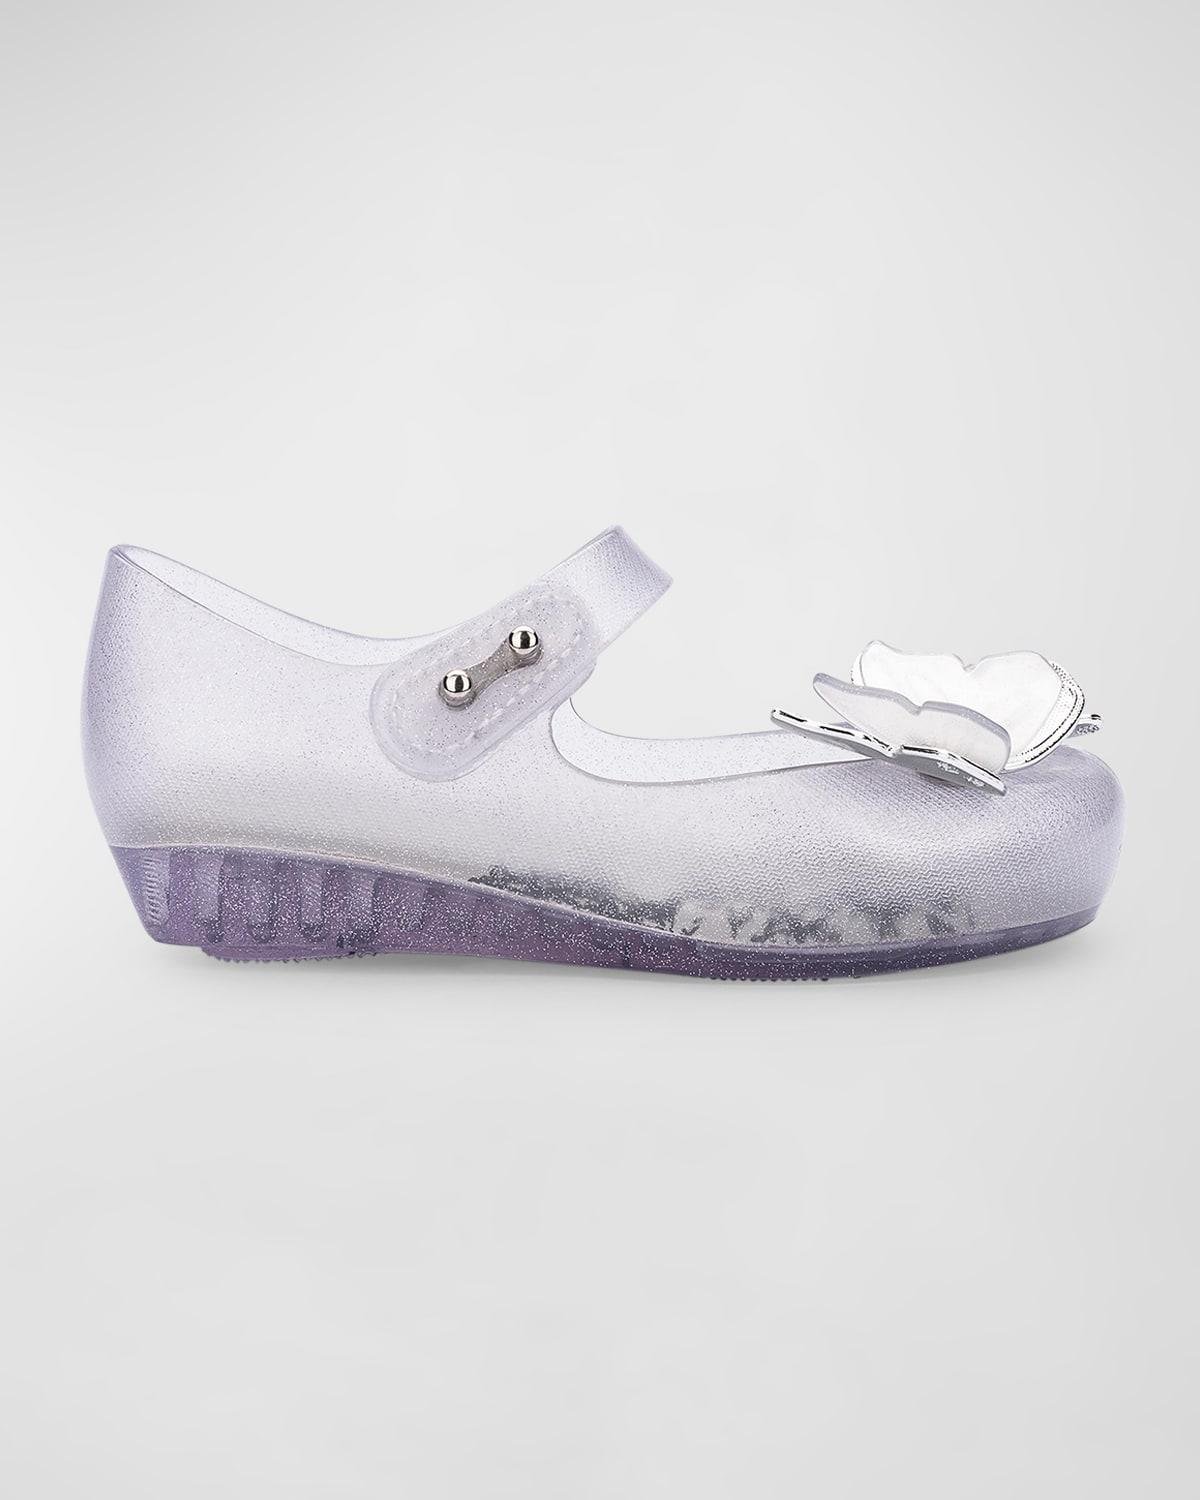 Ultragirl Fly III Mary Jane Flats, Baby/Toddler by MELISSA